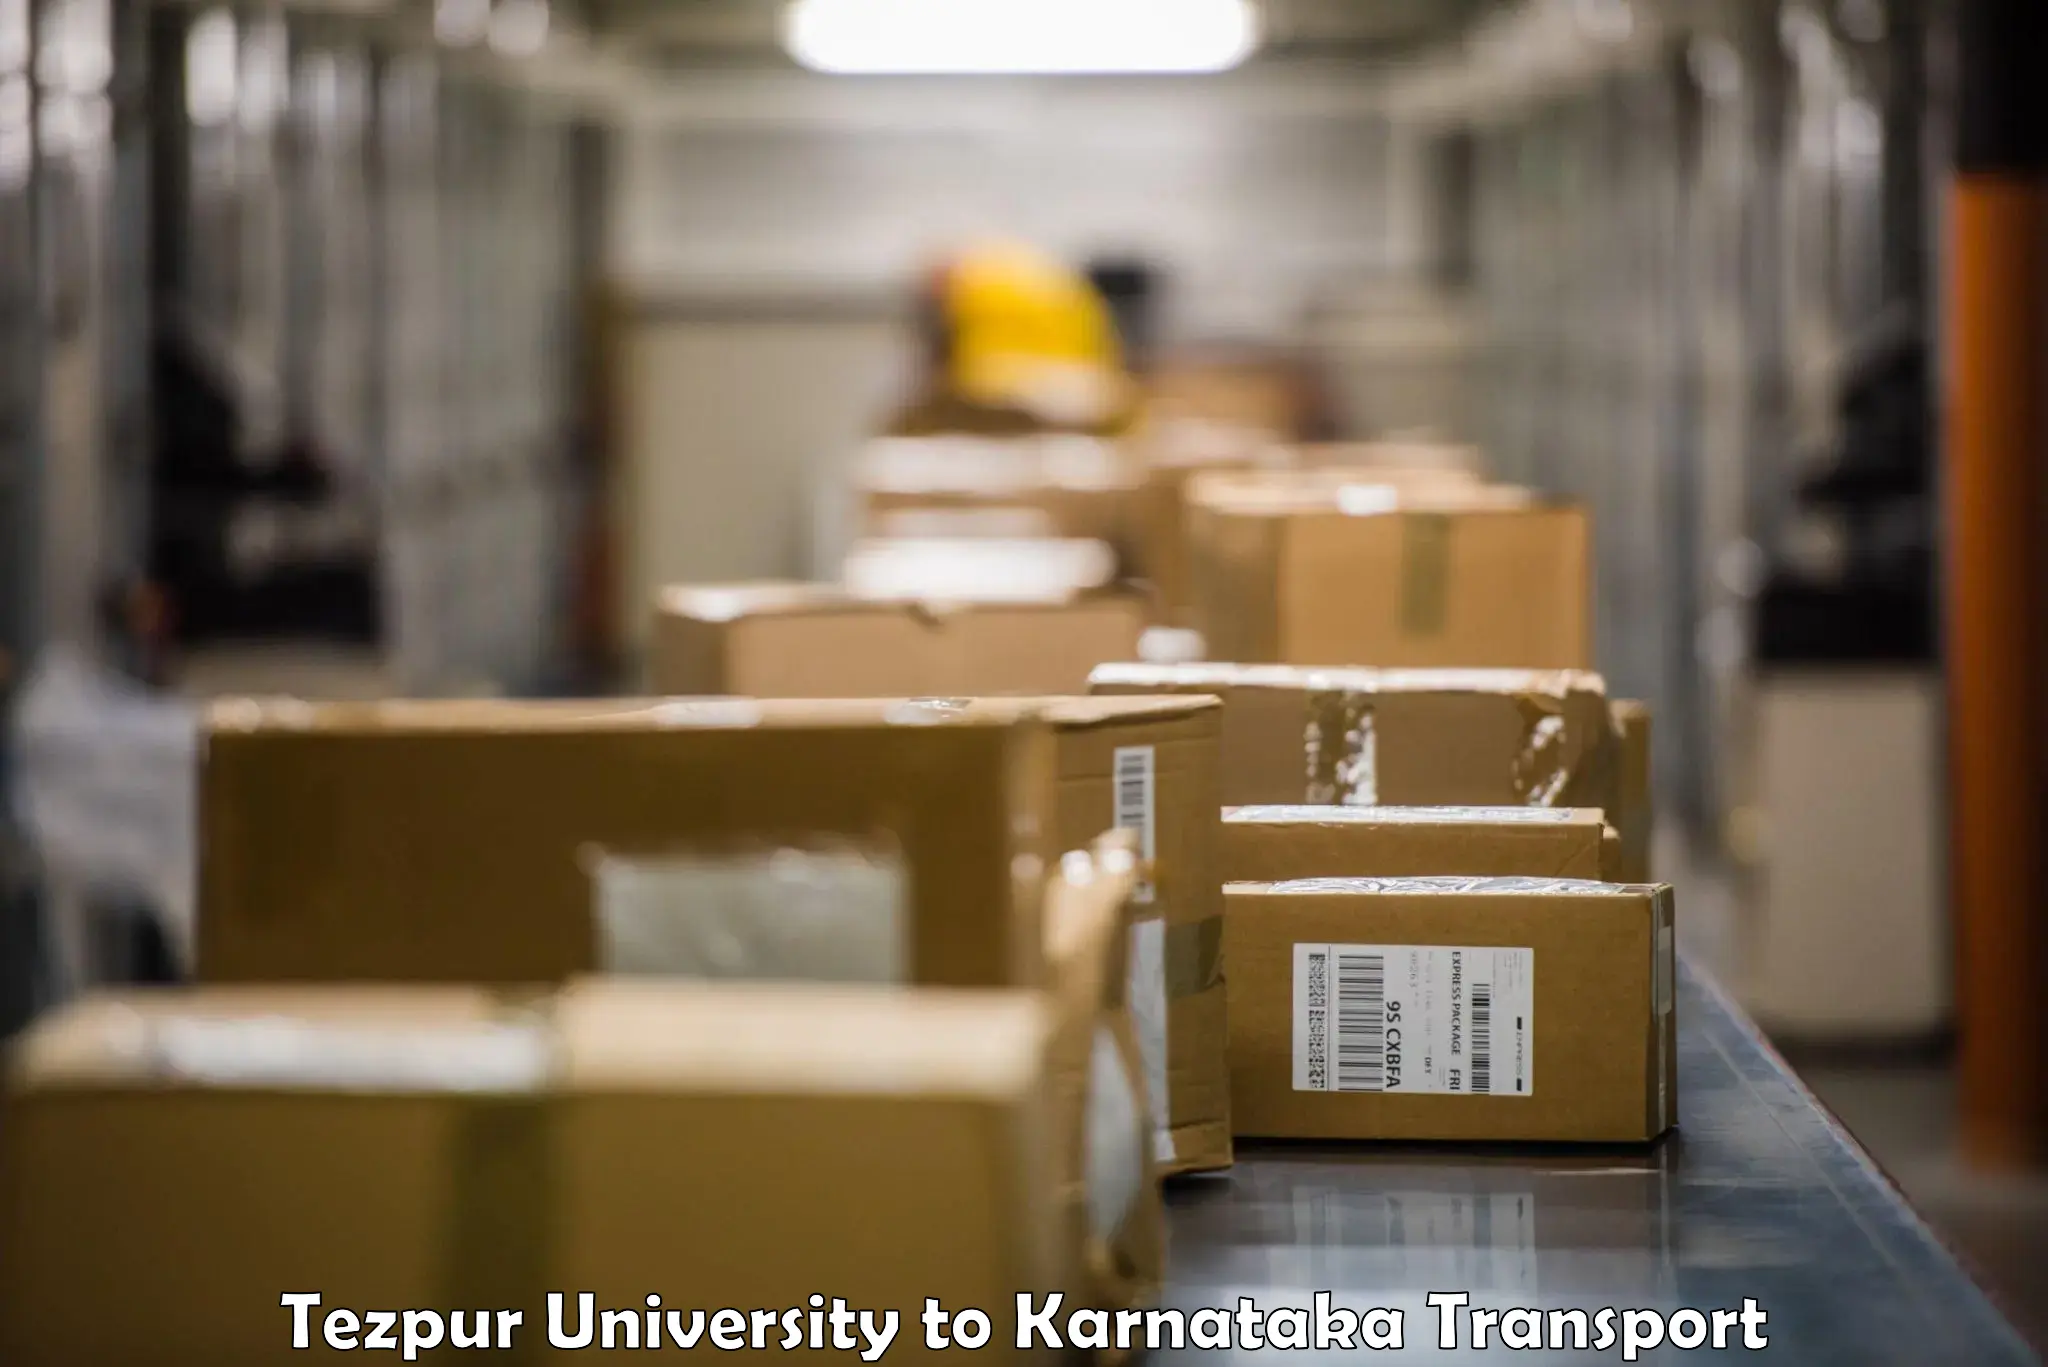 Container transport service Tezpur University to Bagalkot